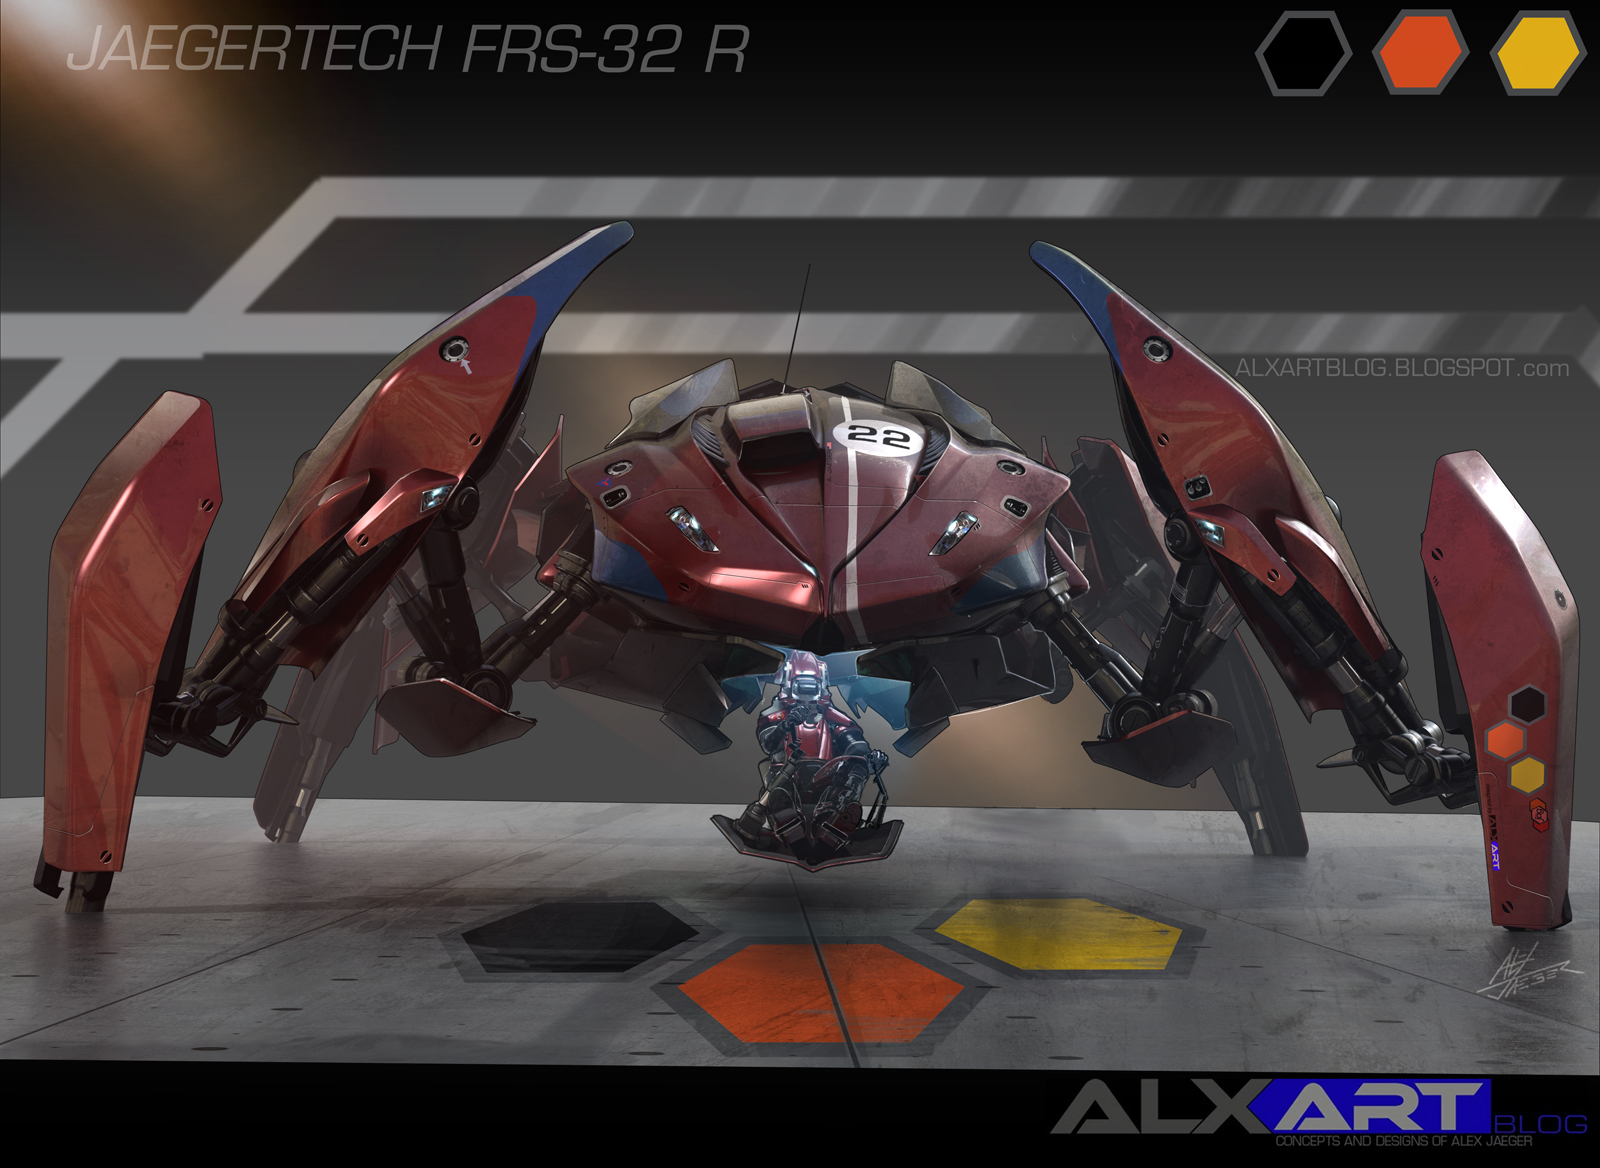 I Really Wish There Were Races Of These Awesome Spider Mechs